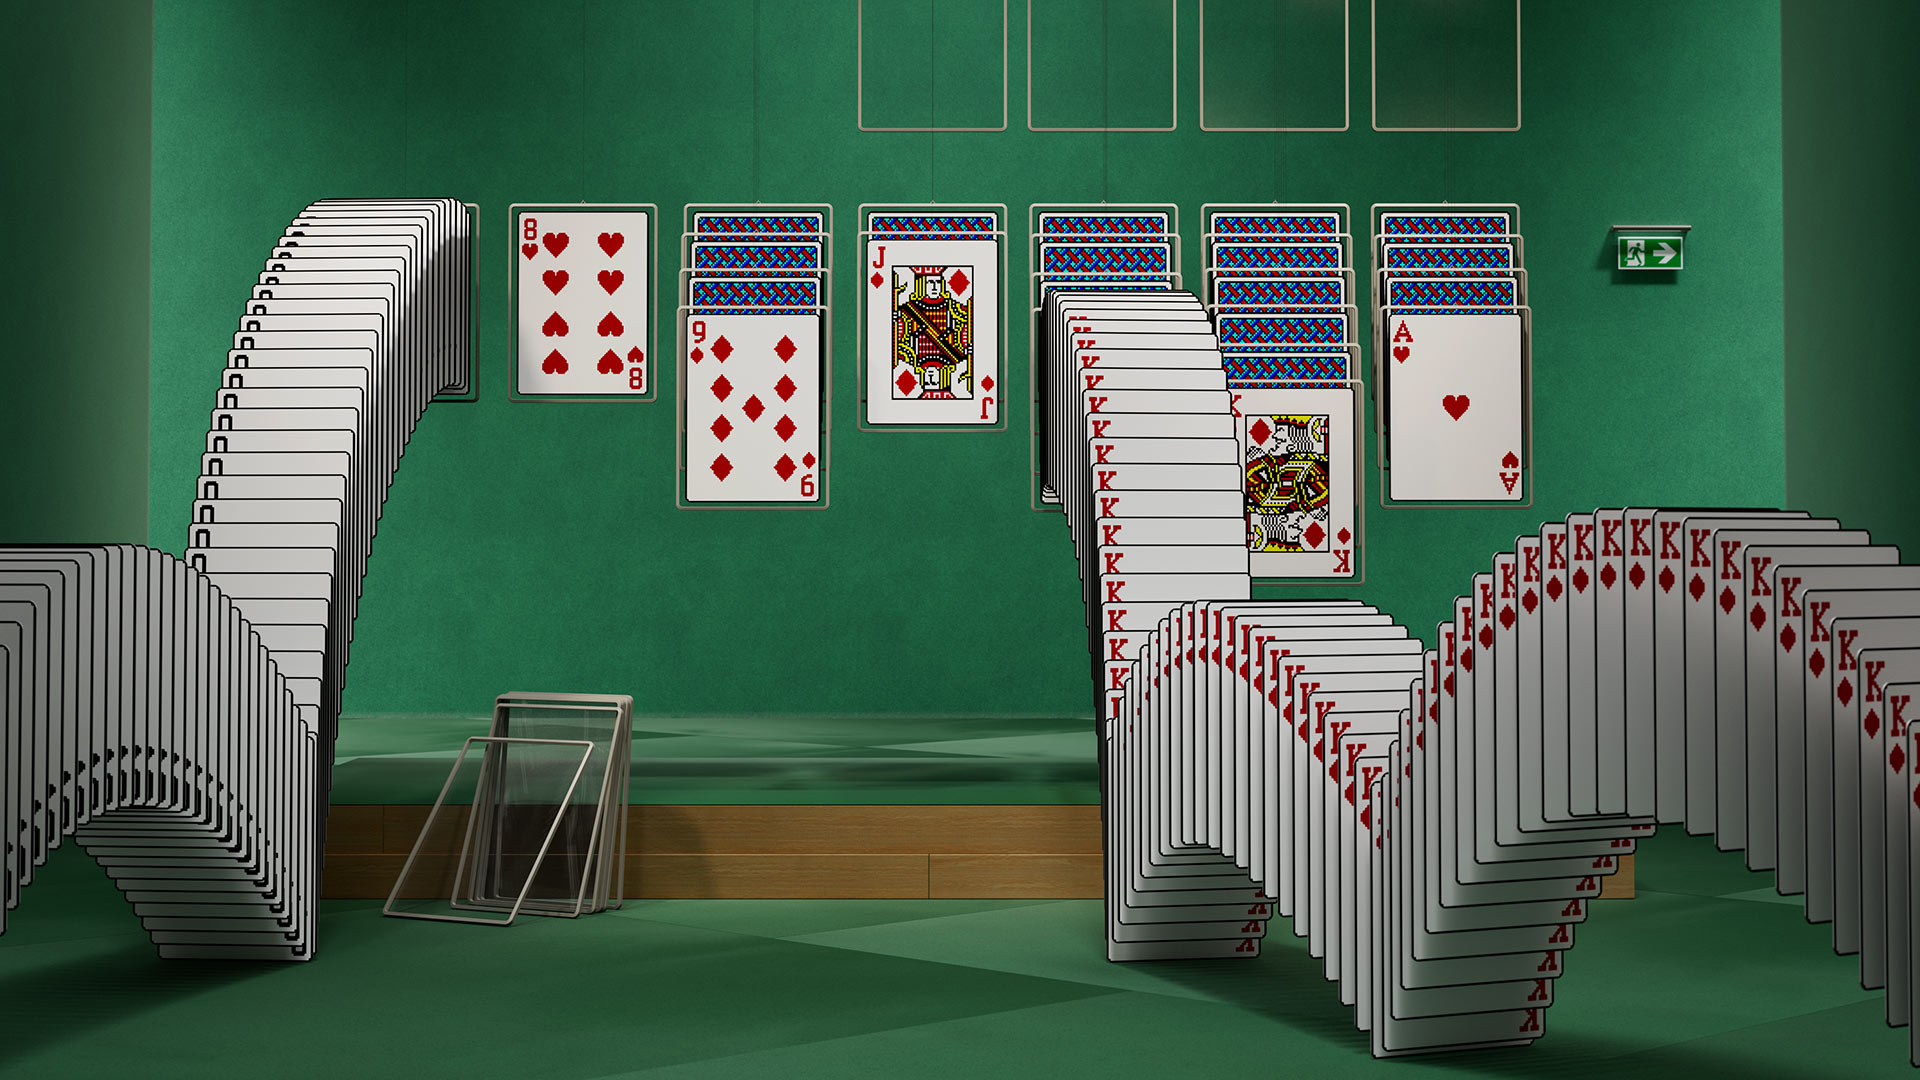 General 1920x1080 Microsoft Microsoft Windows Solitaire cards frame green background nostalgia old games playing cards